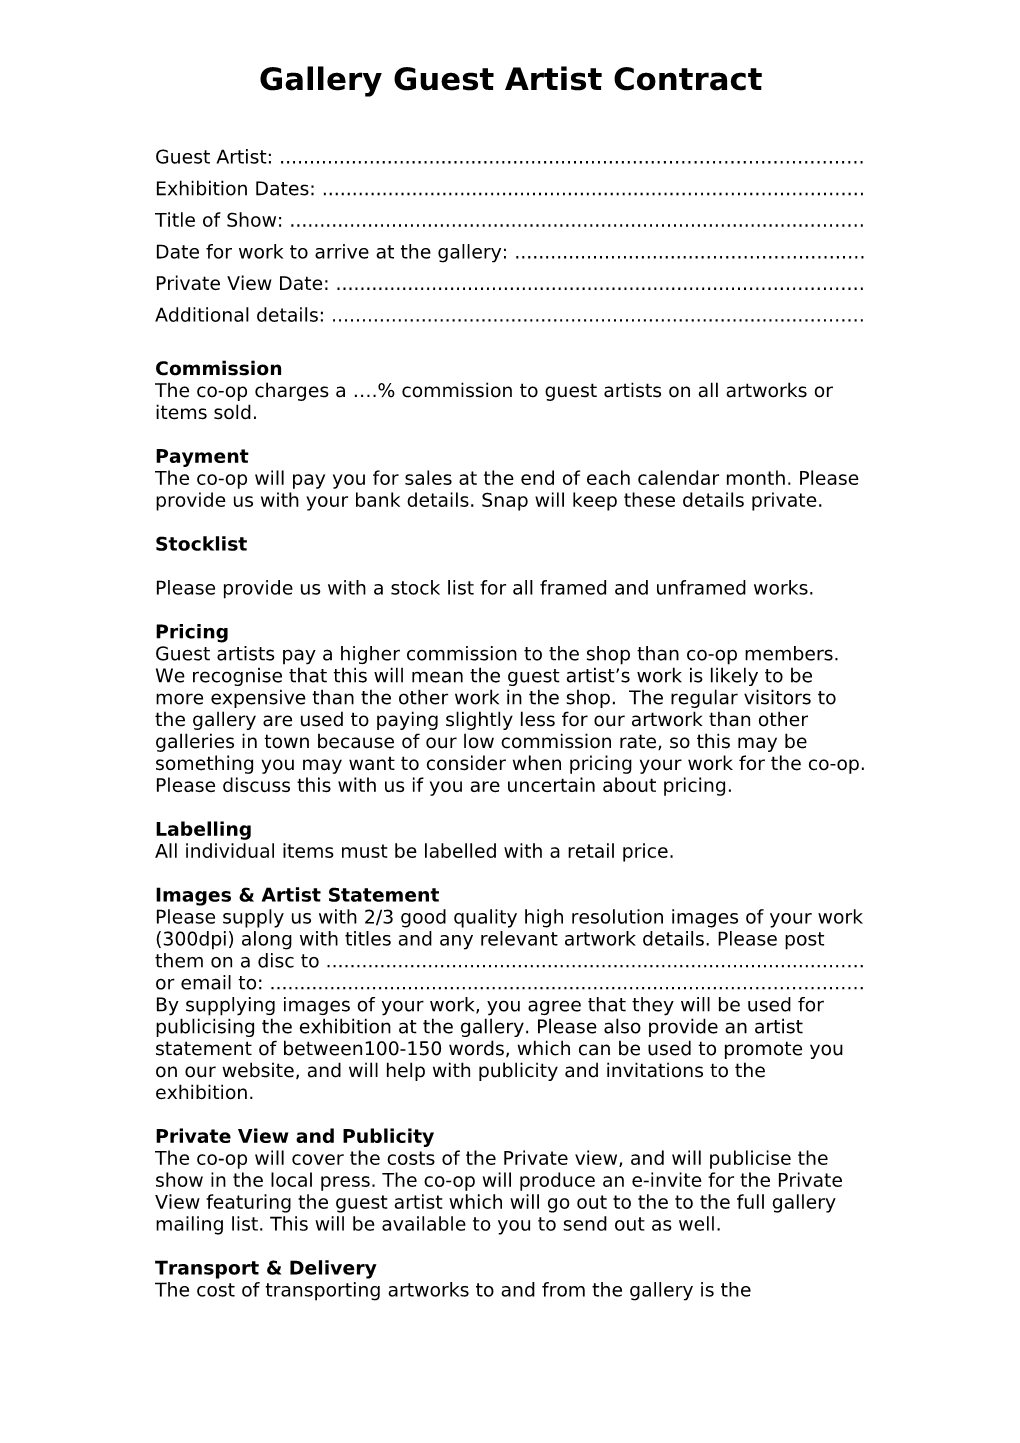 Gallery Guest Artist Contract